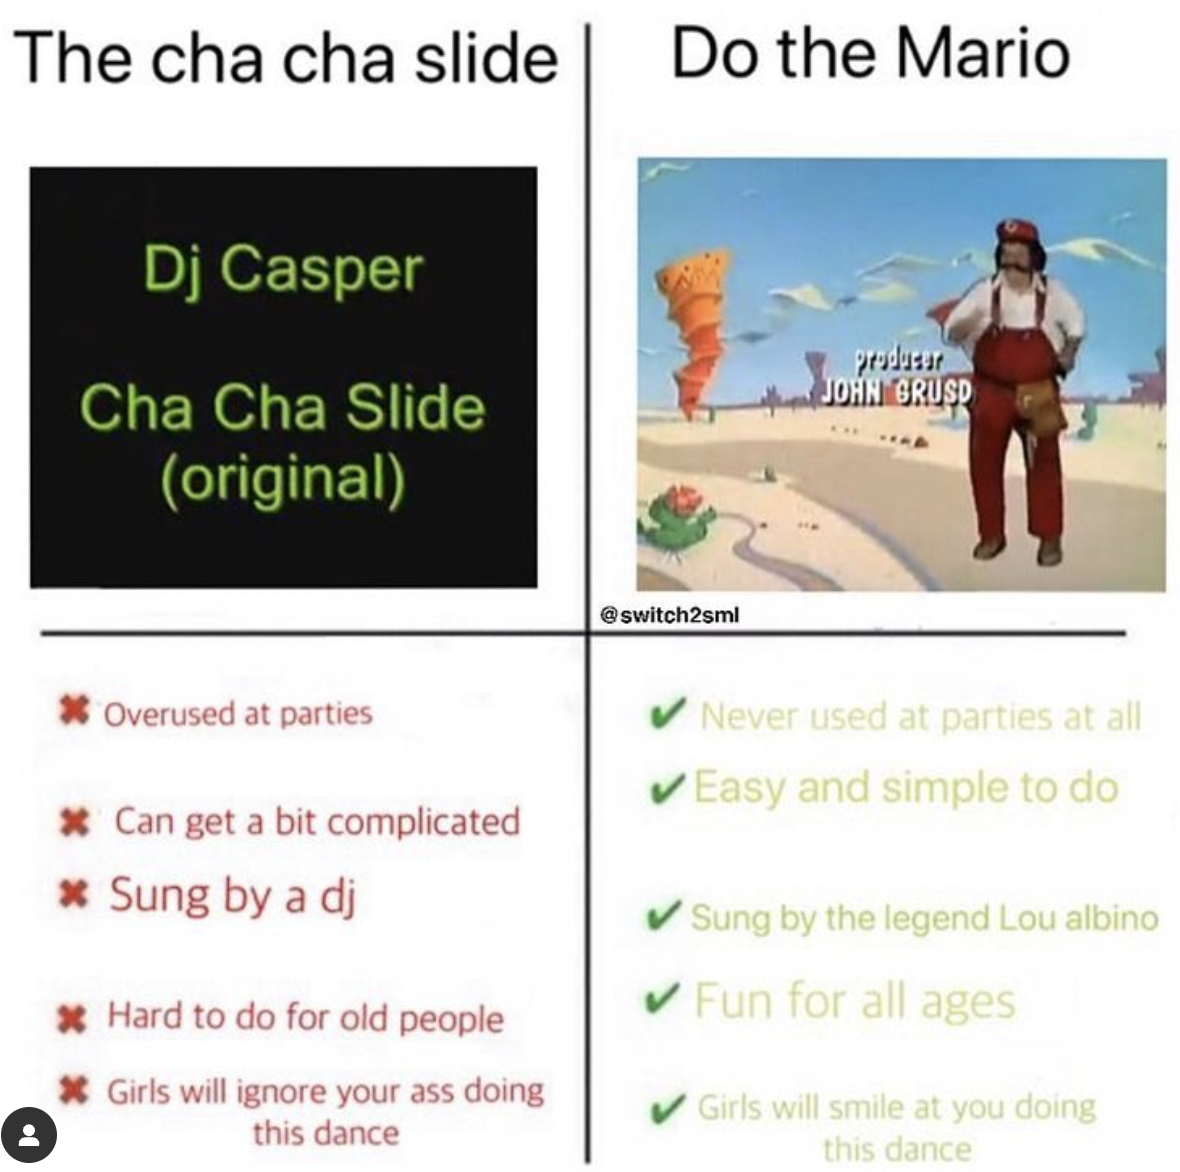 Nintendo memes - super mario bros super show - The cha cha slide Dj Casper Cha Cha Slide original Overused at parties Can get a bit complicated Sung by a dj Hard to do for old people Girls will ignore your ass doing this dance Do the Mario